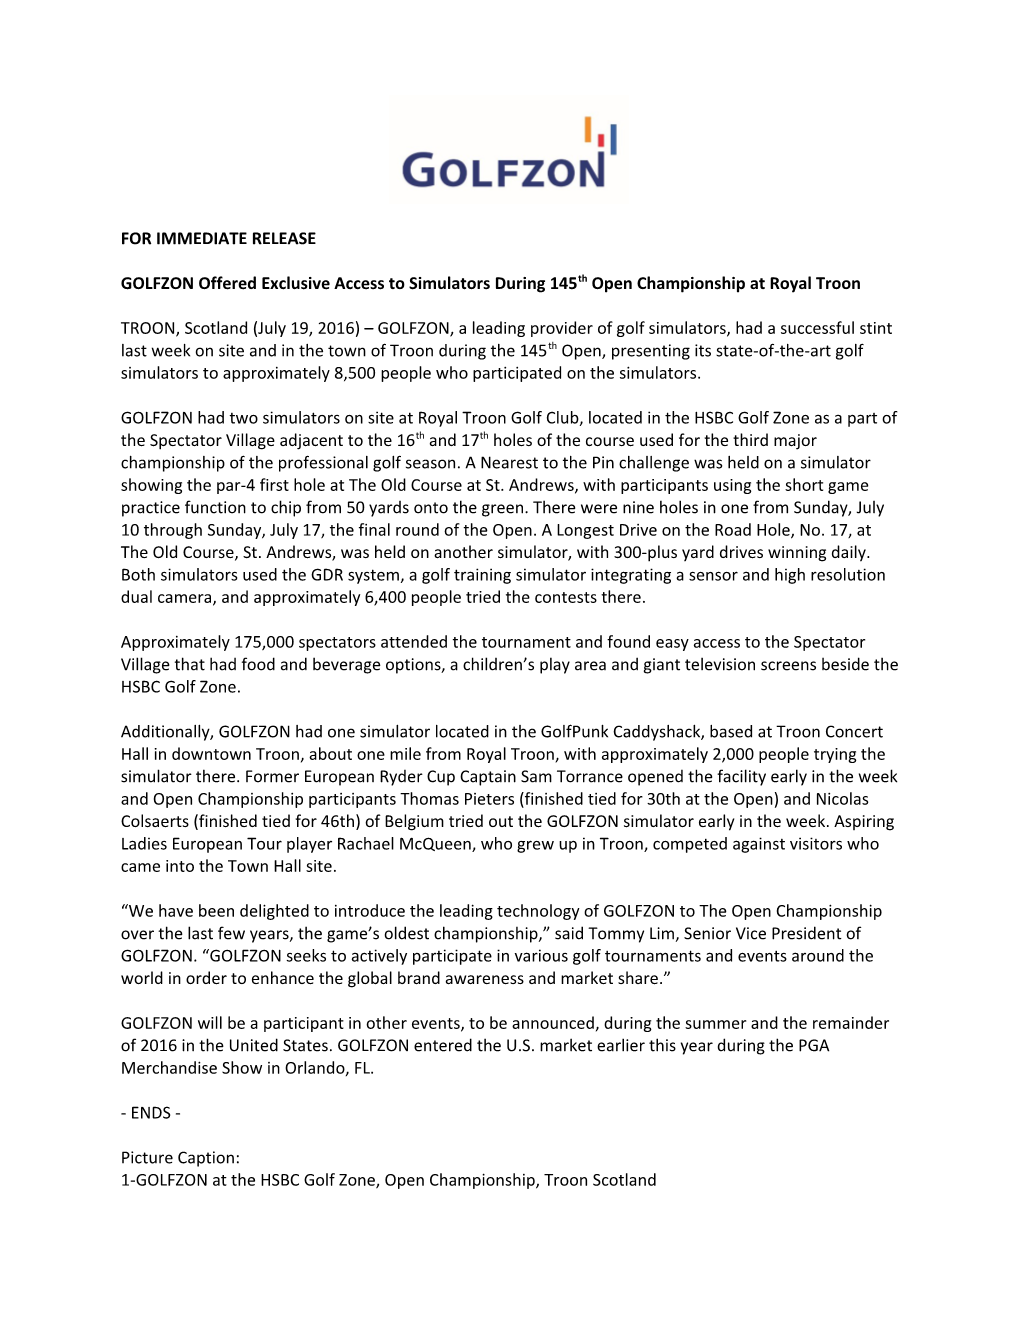 GOLFZON Offered Exclusive Access to Simulators During 145Th Open Championship at Royal Troon